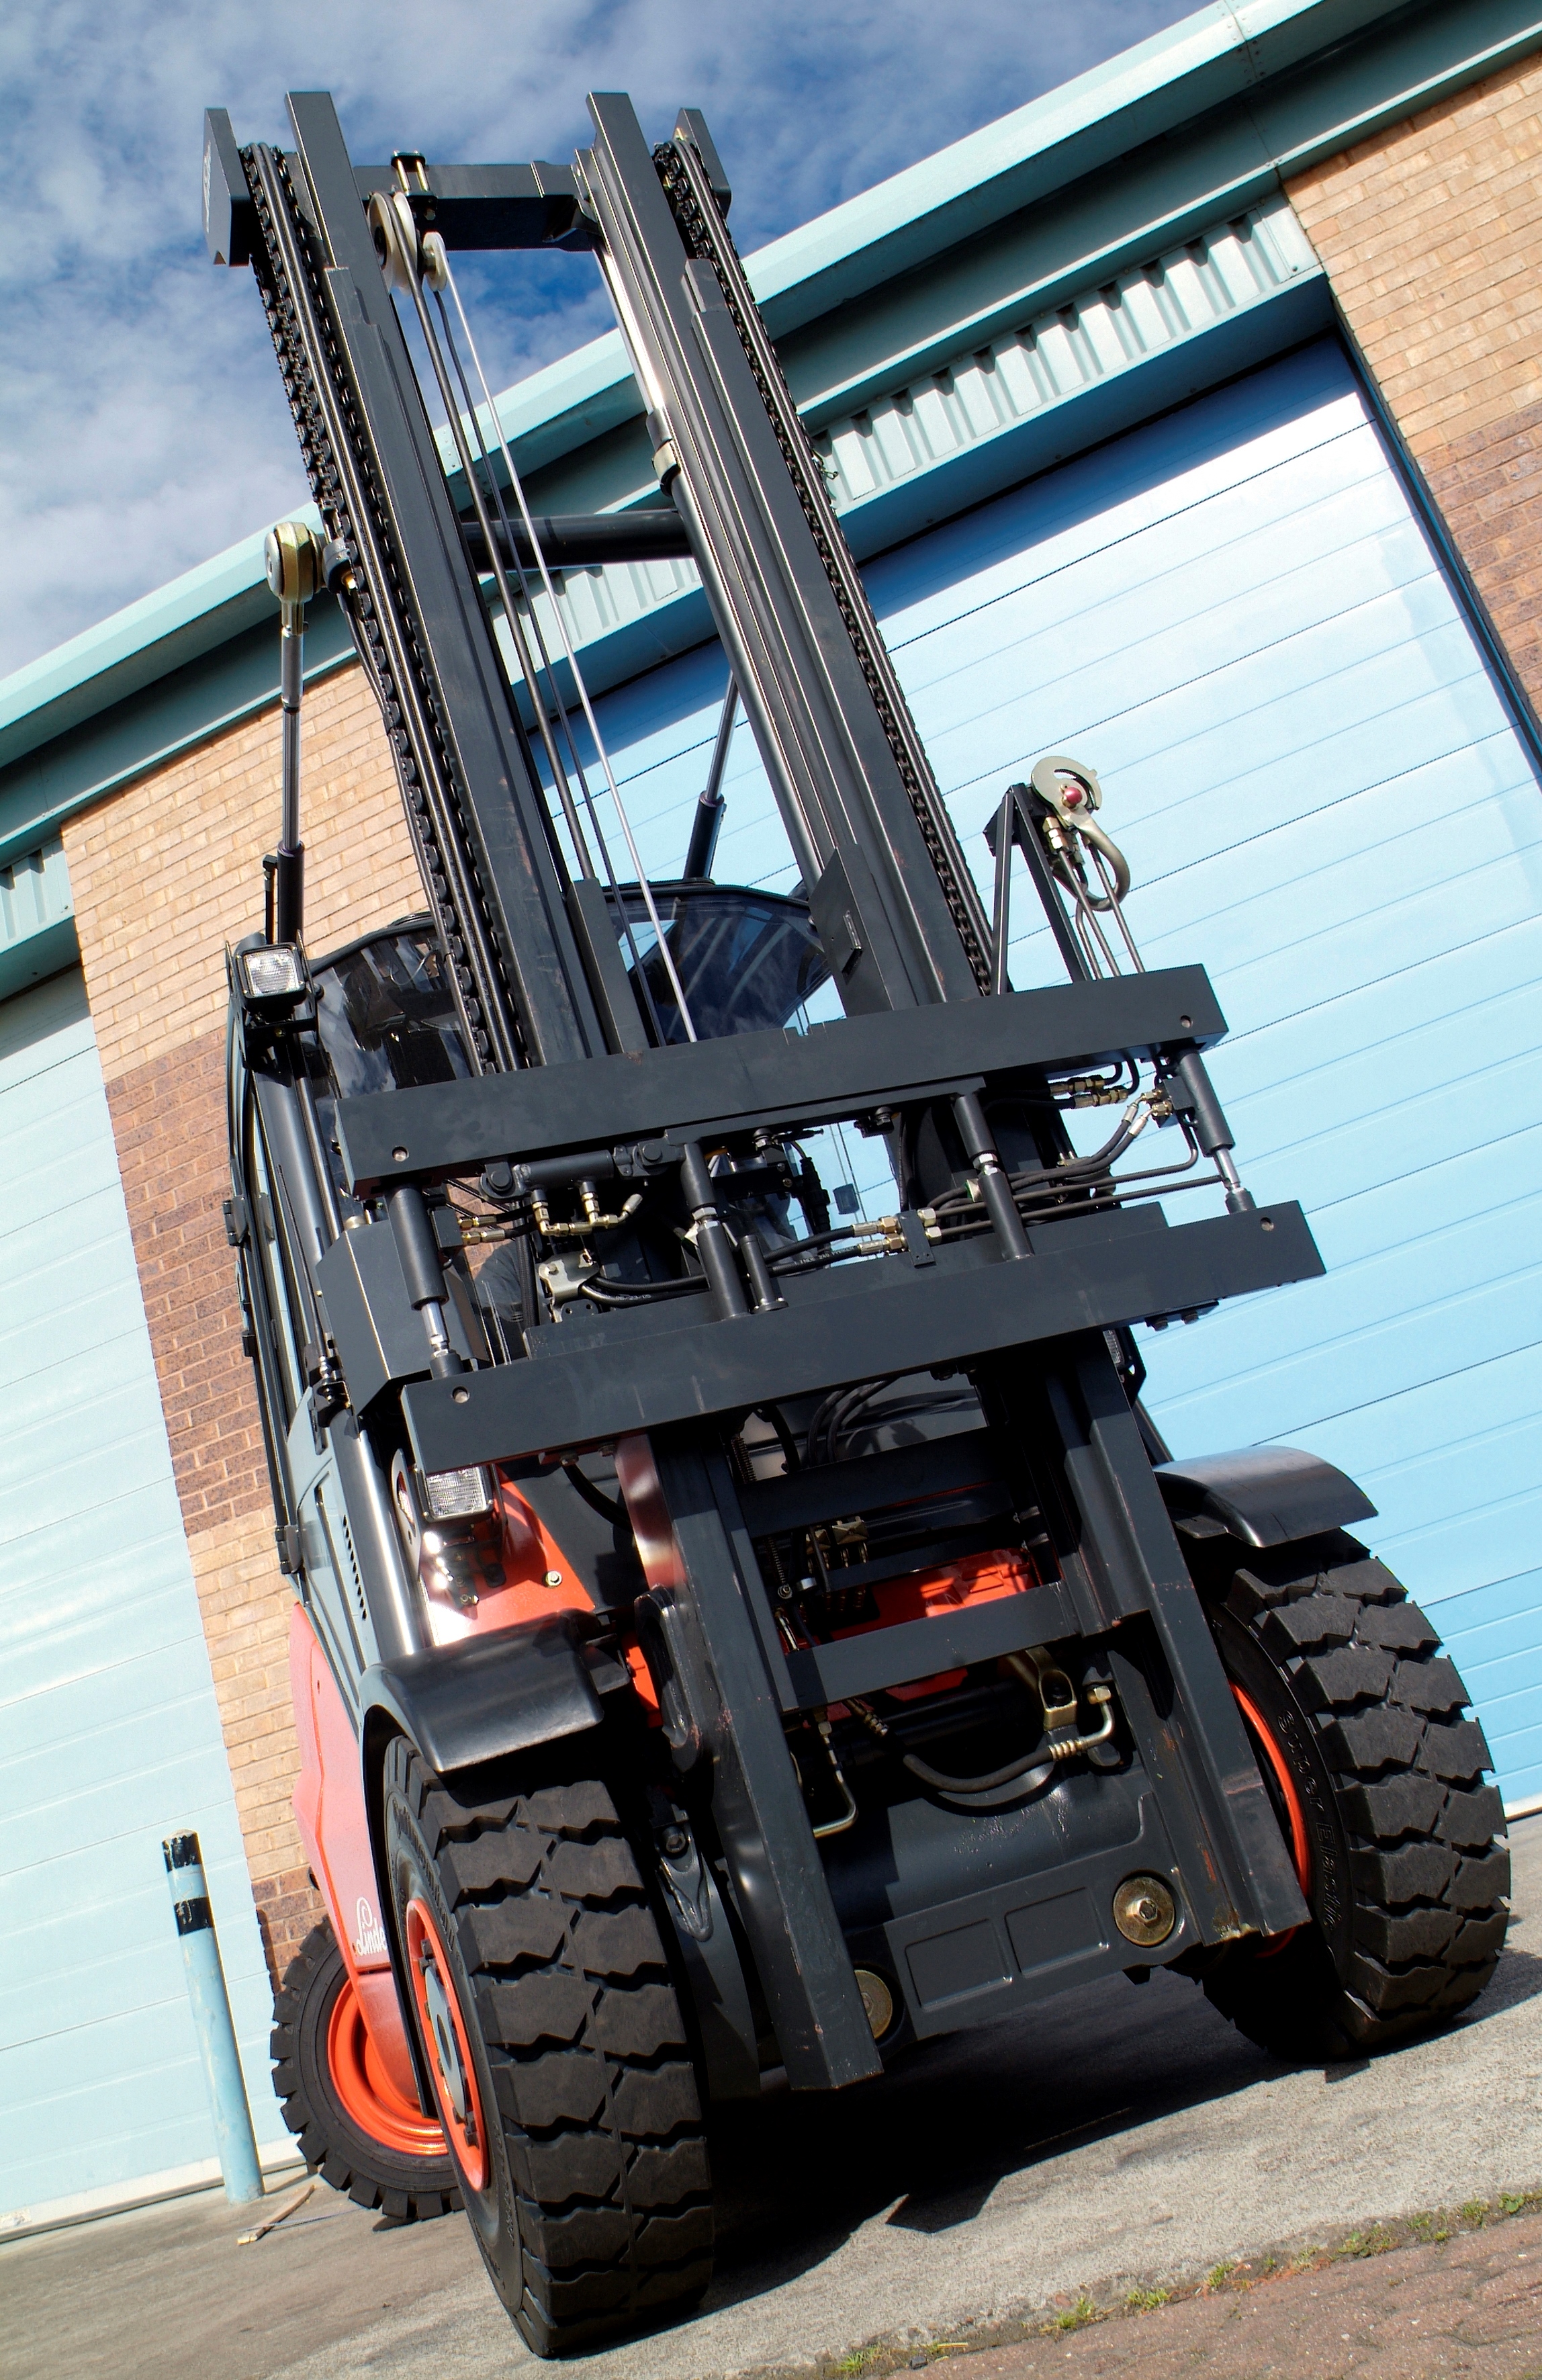 PowerMount the Quick Release System to Interchange Forklift Attachments